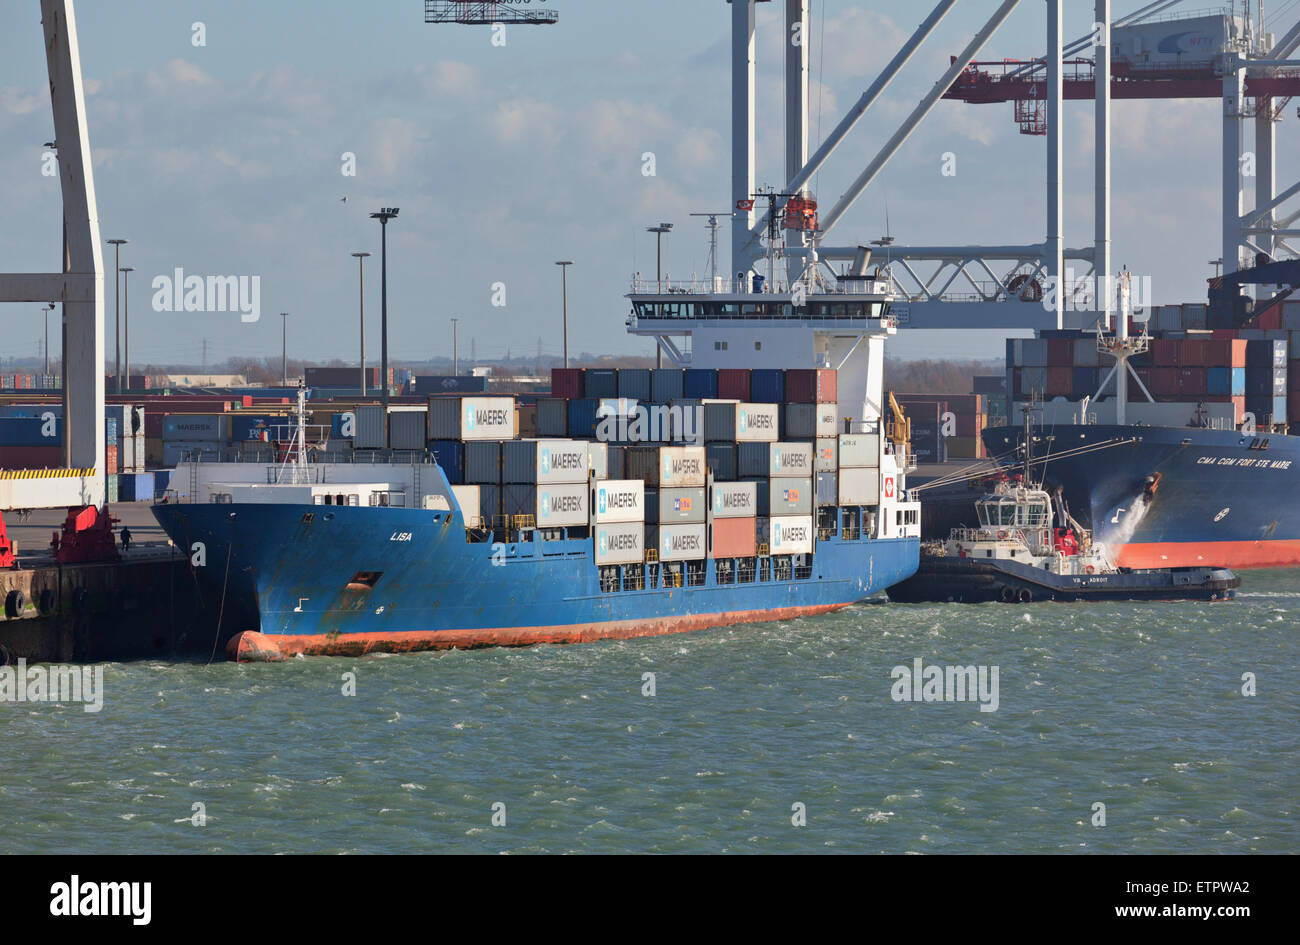 Tug boat assisting container ship by leaving Dunkerque Harbour Stock Photo